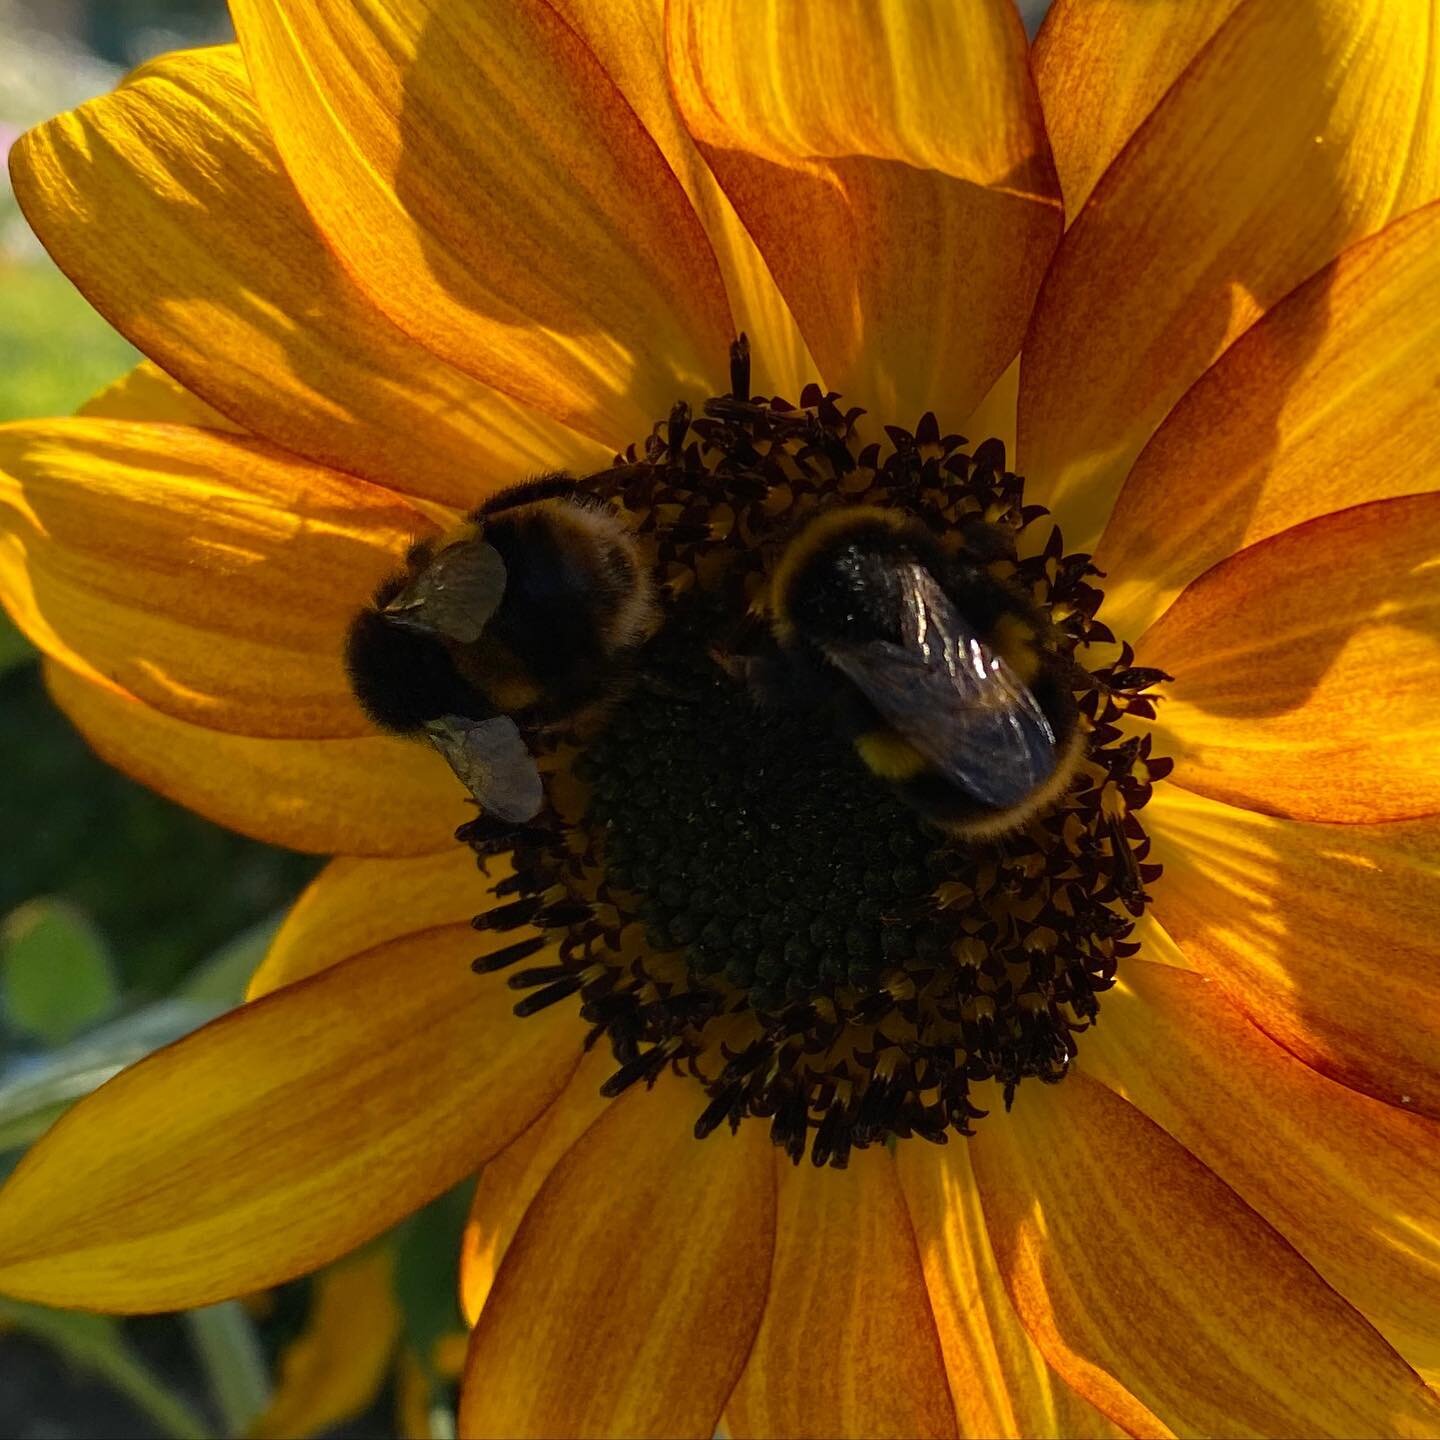 A hot, hot day in The Pickery at Easton Walled Gardens, but the bees love it and never stop&hellip;&hellip;